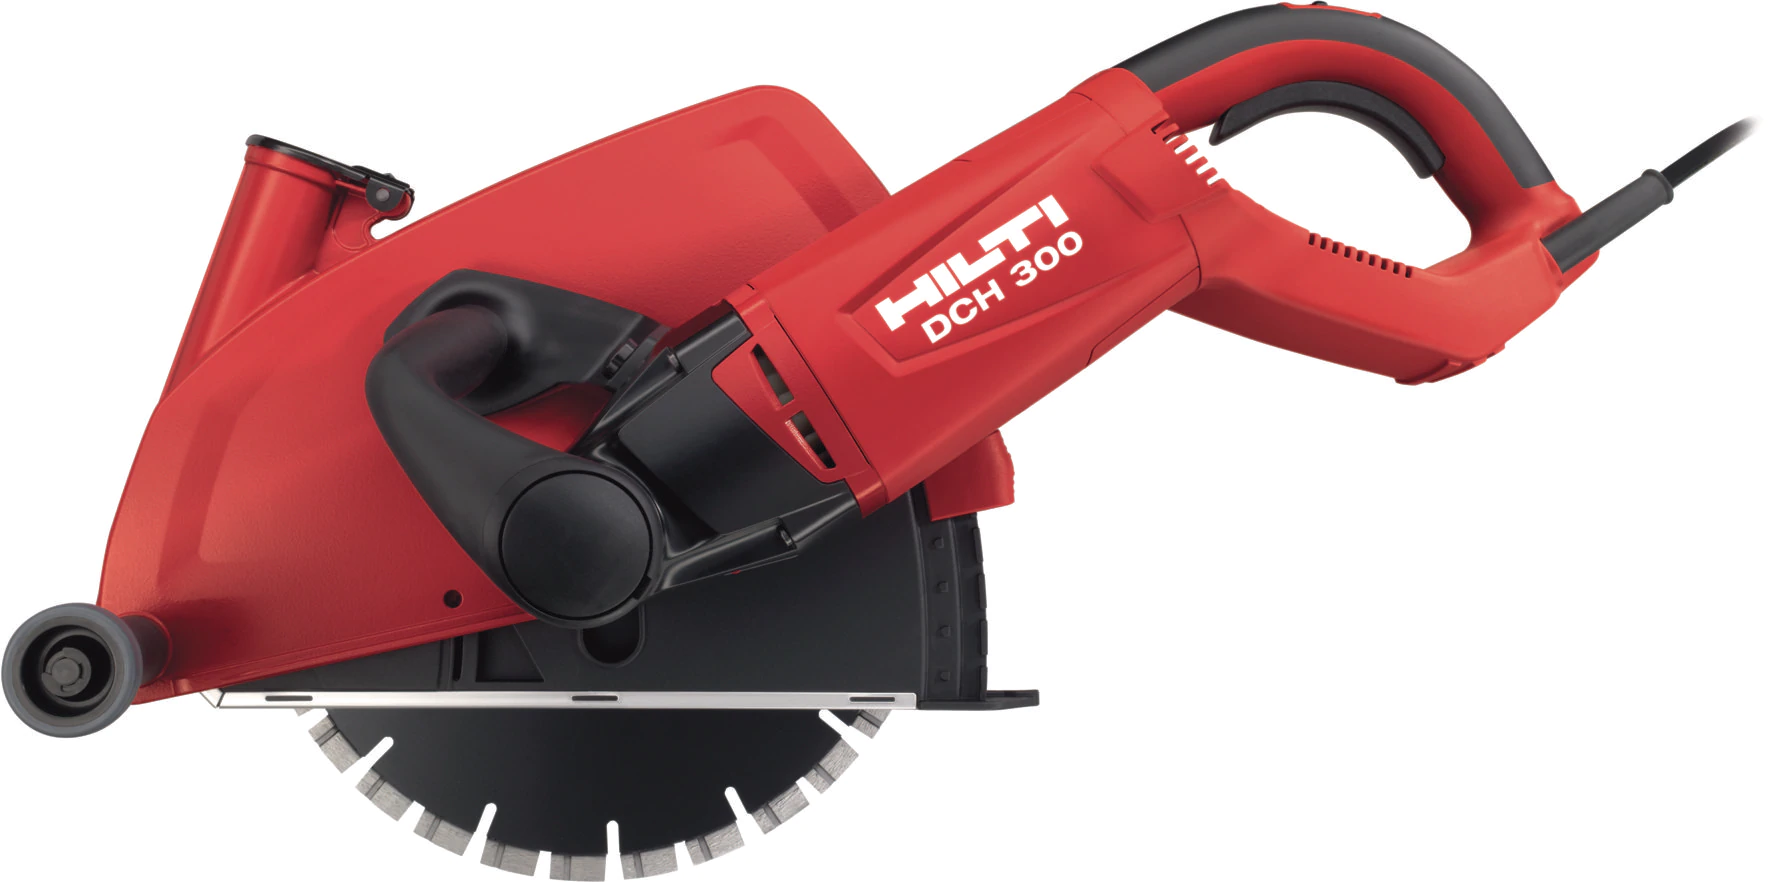 For Rent: Cut-Off Saw, 12” ELECTRIC (Hilti DCH300)